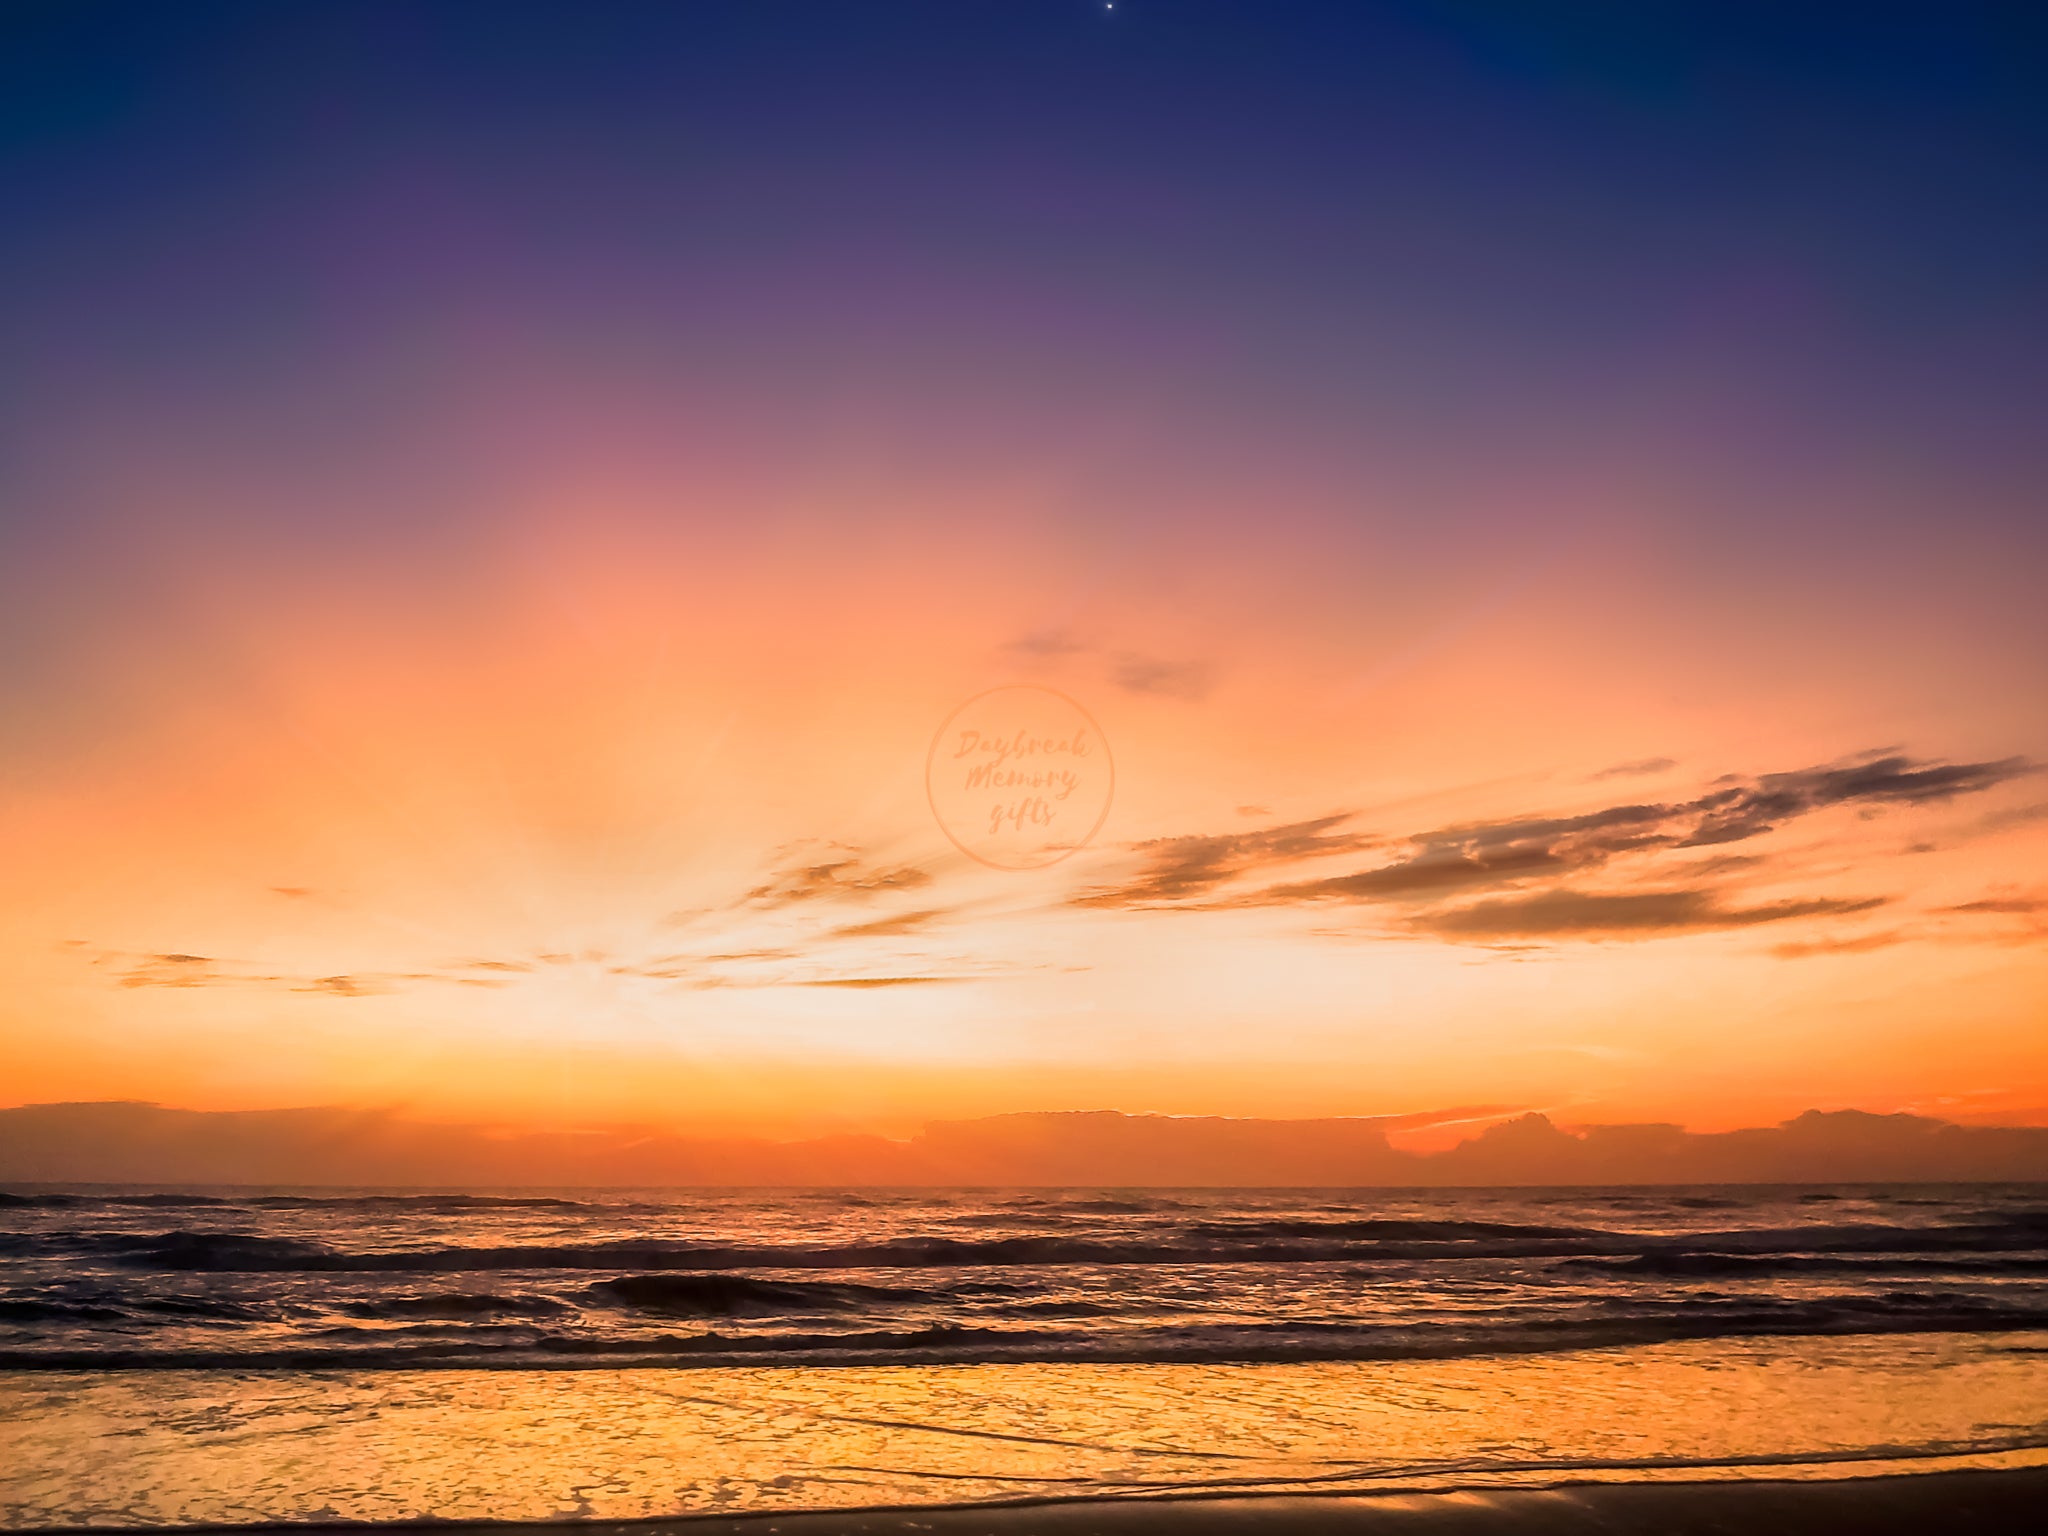 October 11, 2020 Sunrise over Jacksonville Beach. The perfect unique gift for special occasions like Newborn Baby gift, Wedding gift, Baptism gift or Client Gifts for their special occasions. Give them the Sunrise that corresponds to their special day. These high quality prints also make for stunning wall art that add a WOW Factor to room décor or office décor.